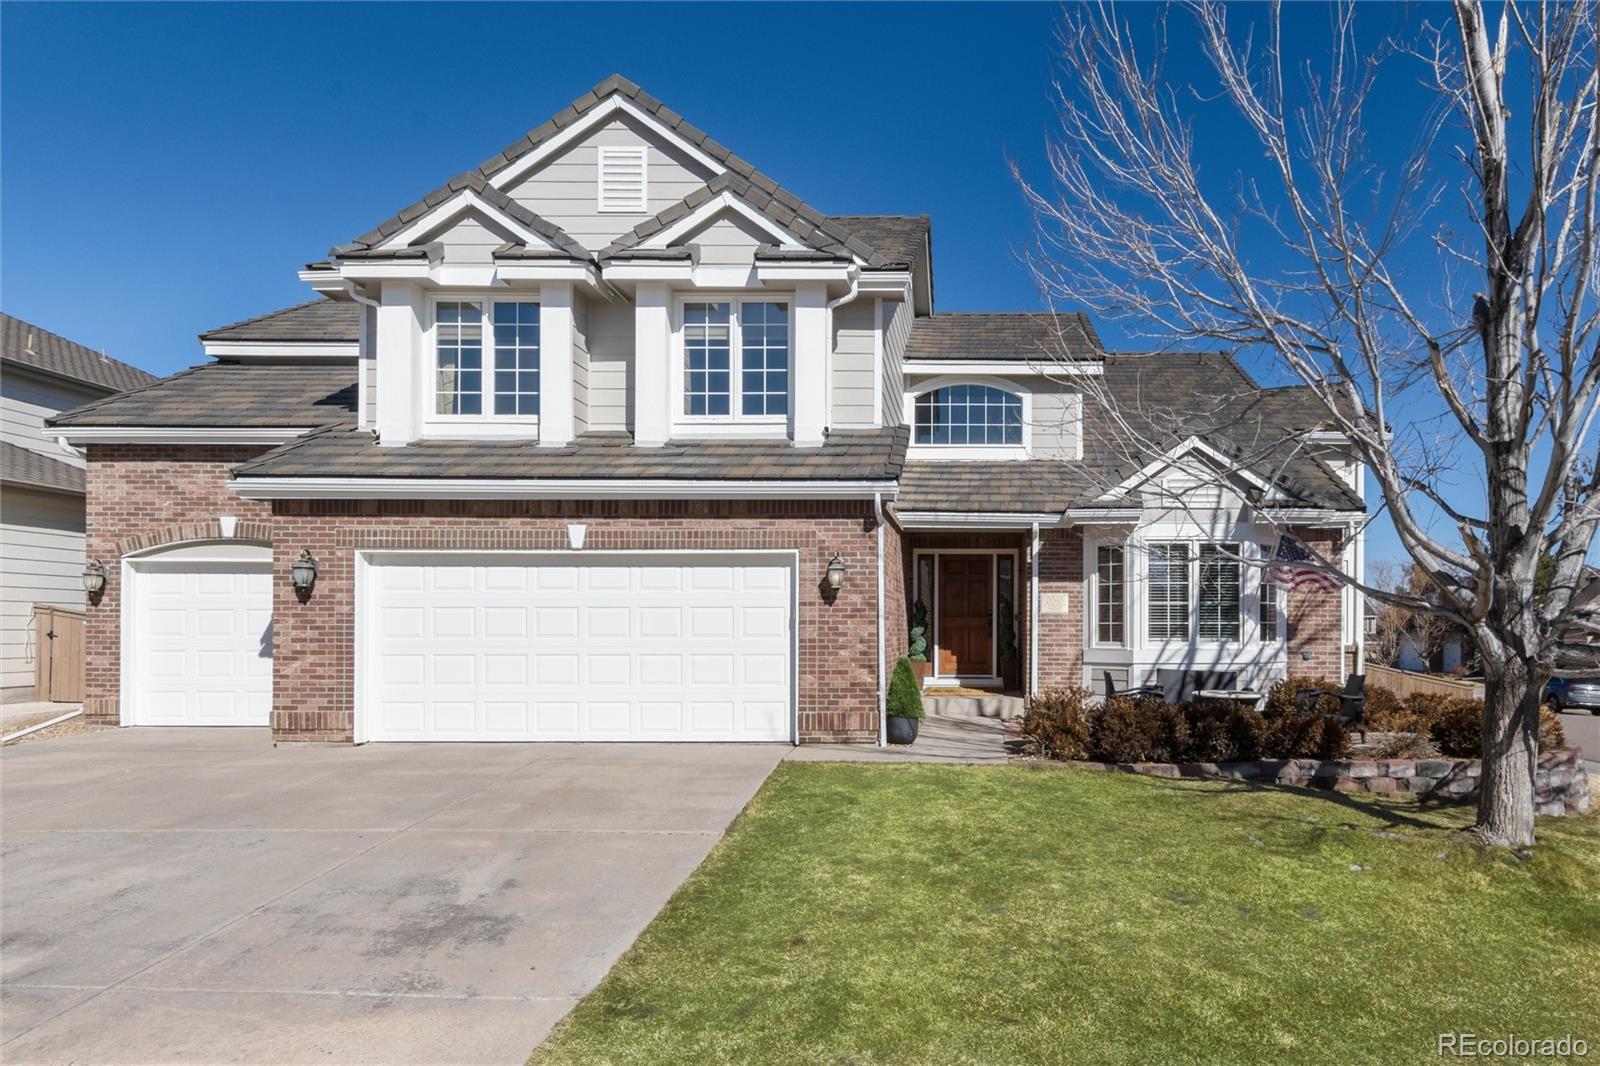 9043  forrest drive, Highlands Ranch sold home. Closed on 2024-03-26 for $1,154,000.